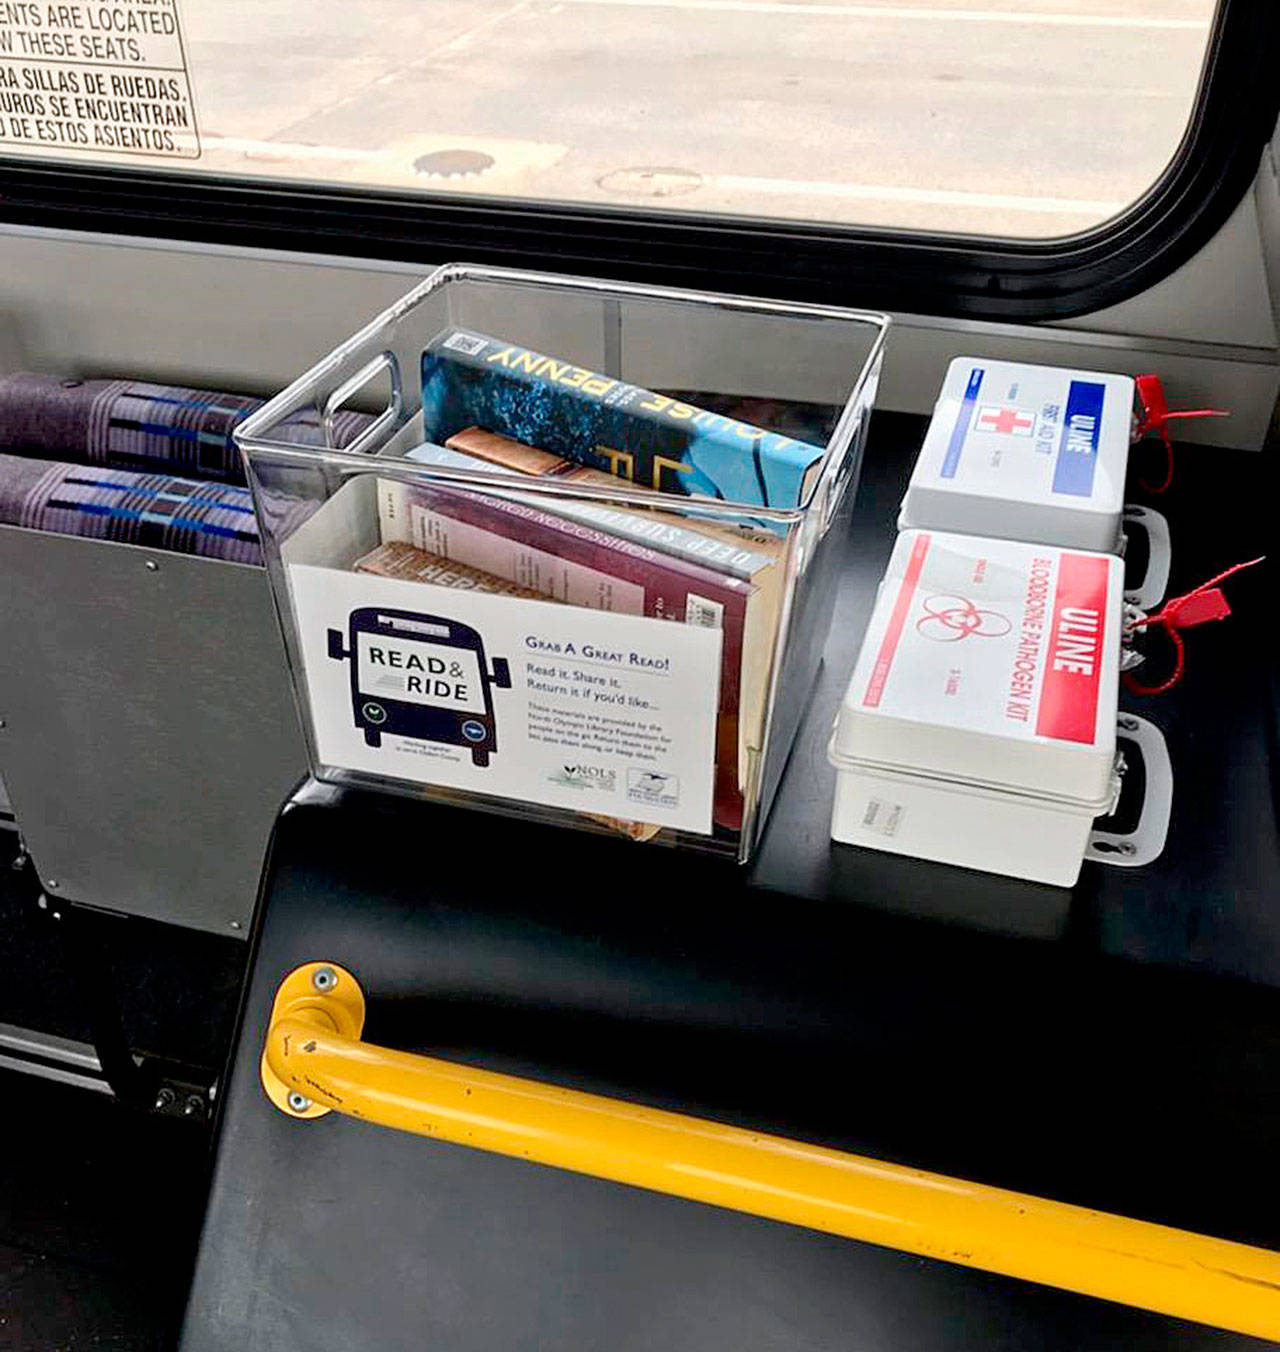 The North Olympic Library System and Clallam Transit have partnered to make available books and magazines to riders of select transit system bus routes. Photo courtesy of North Olympic Library System